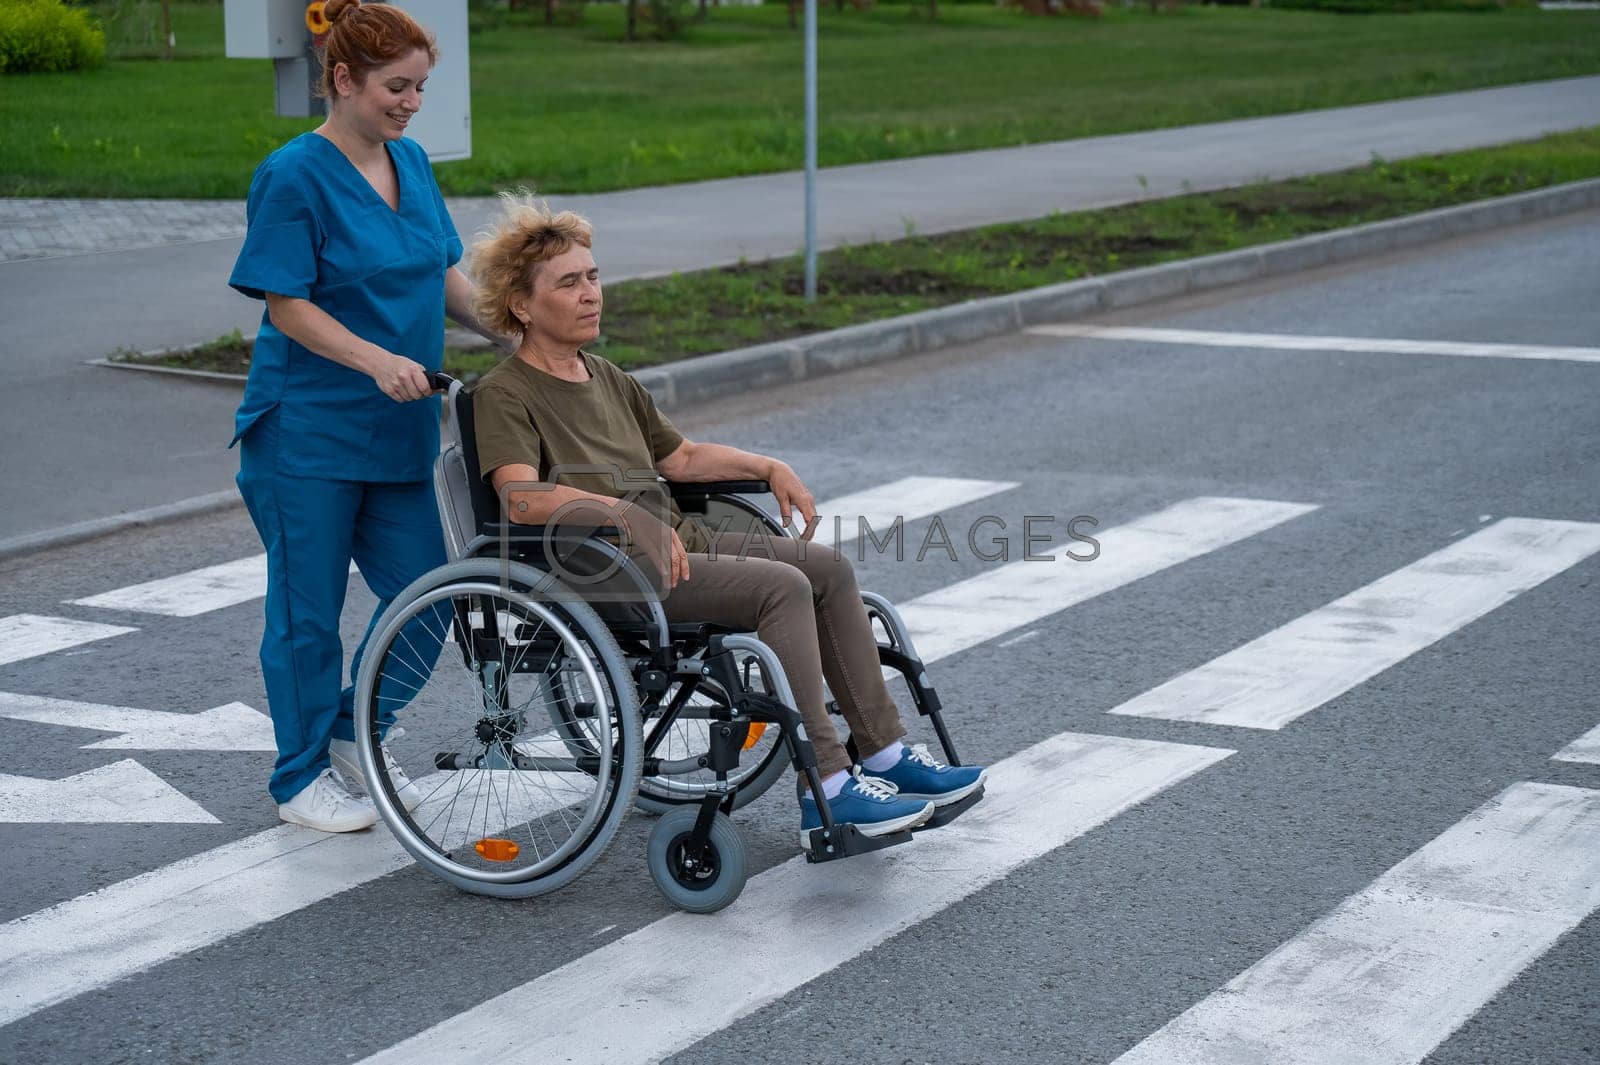 Royalty free image of Red-haired nurse pushing an elderly woman in a wheelchair across the road. by mrwed54